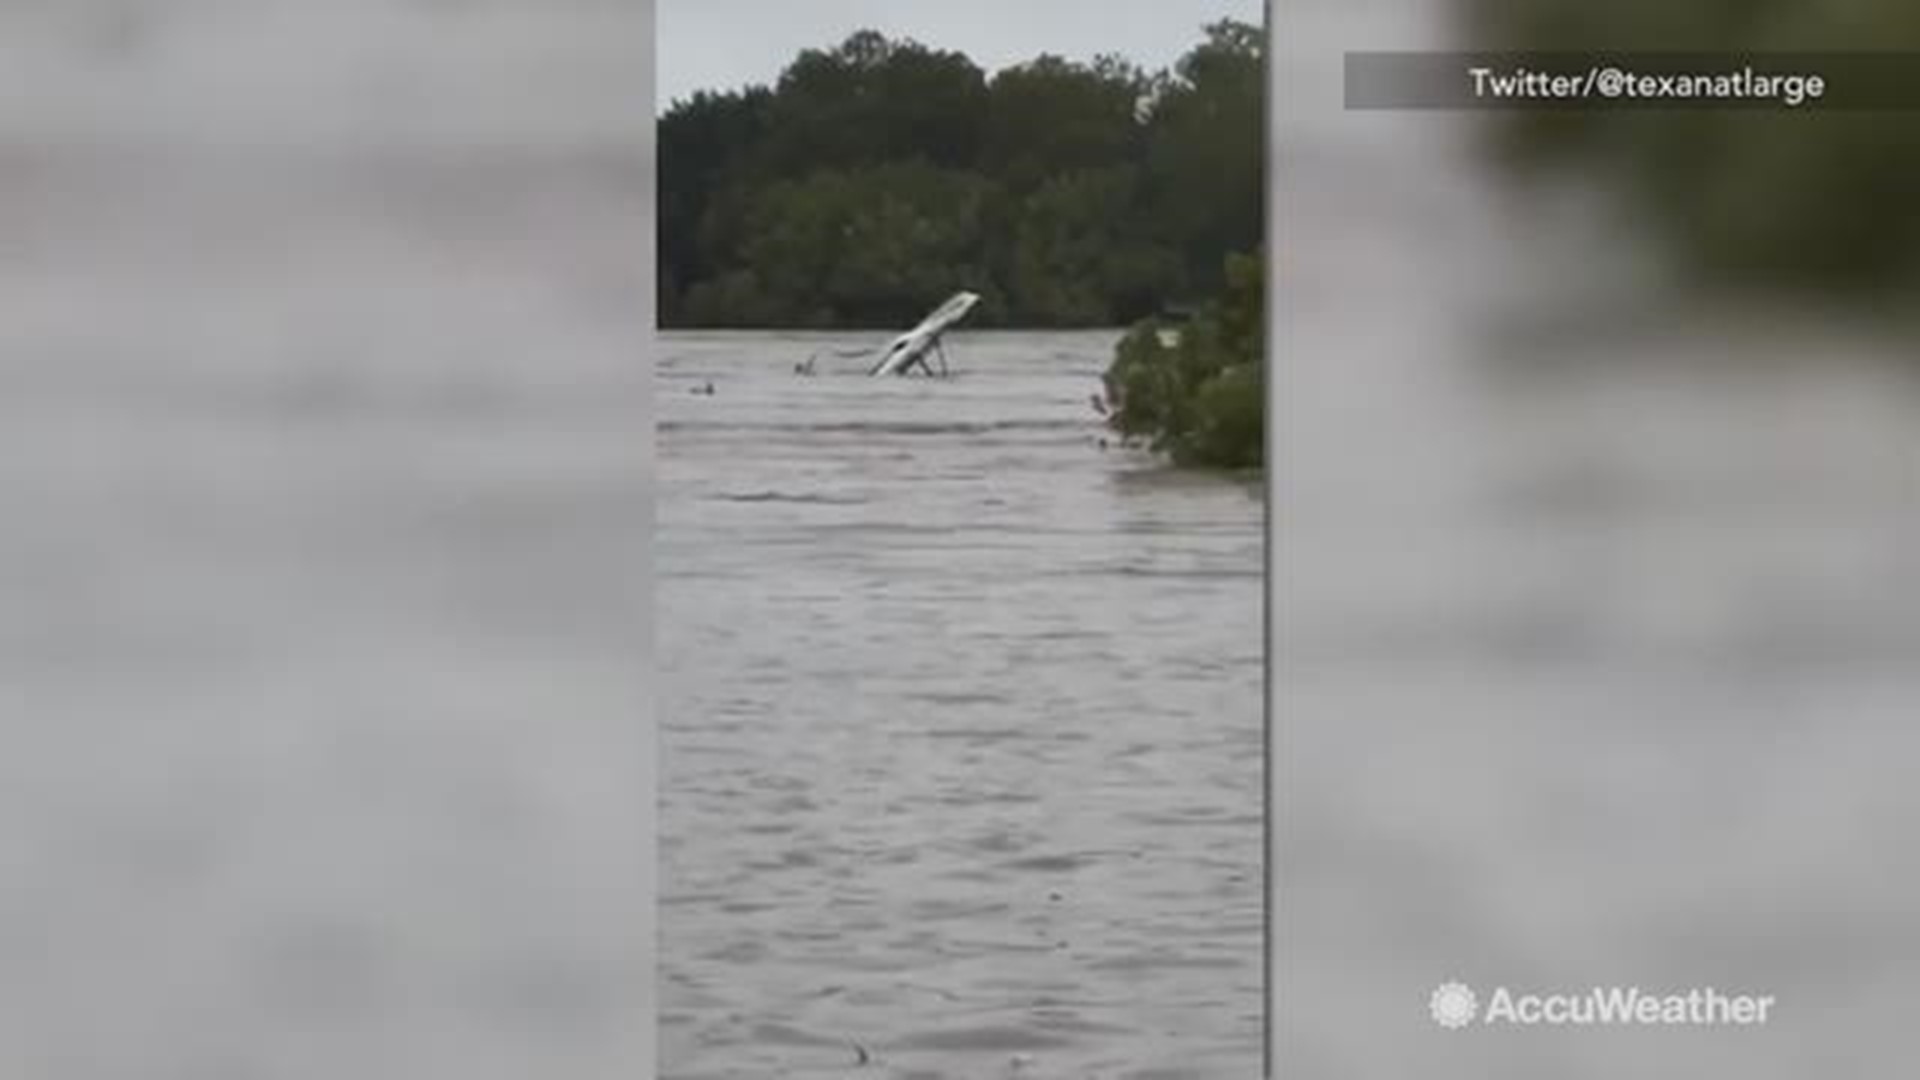 Lake Marble Falls flooded after heavy rainfall across Texas, carrying this massive debris pile.